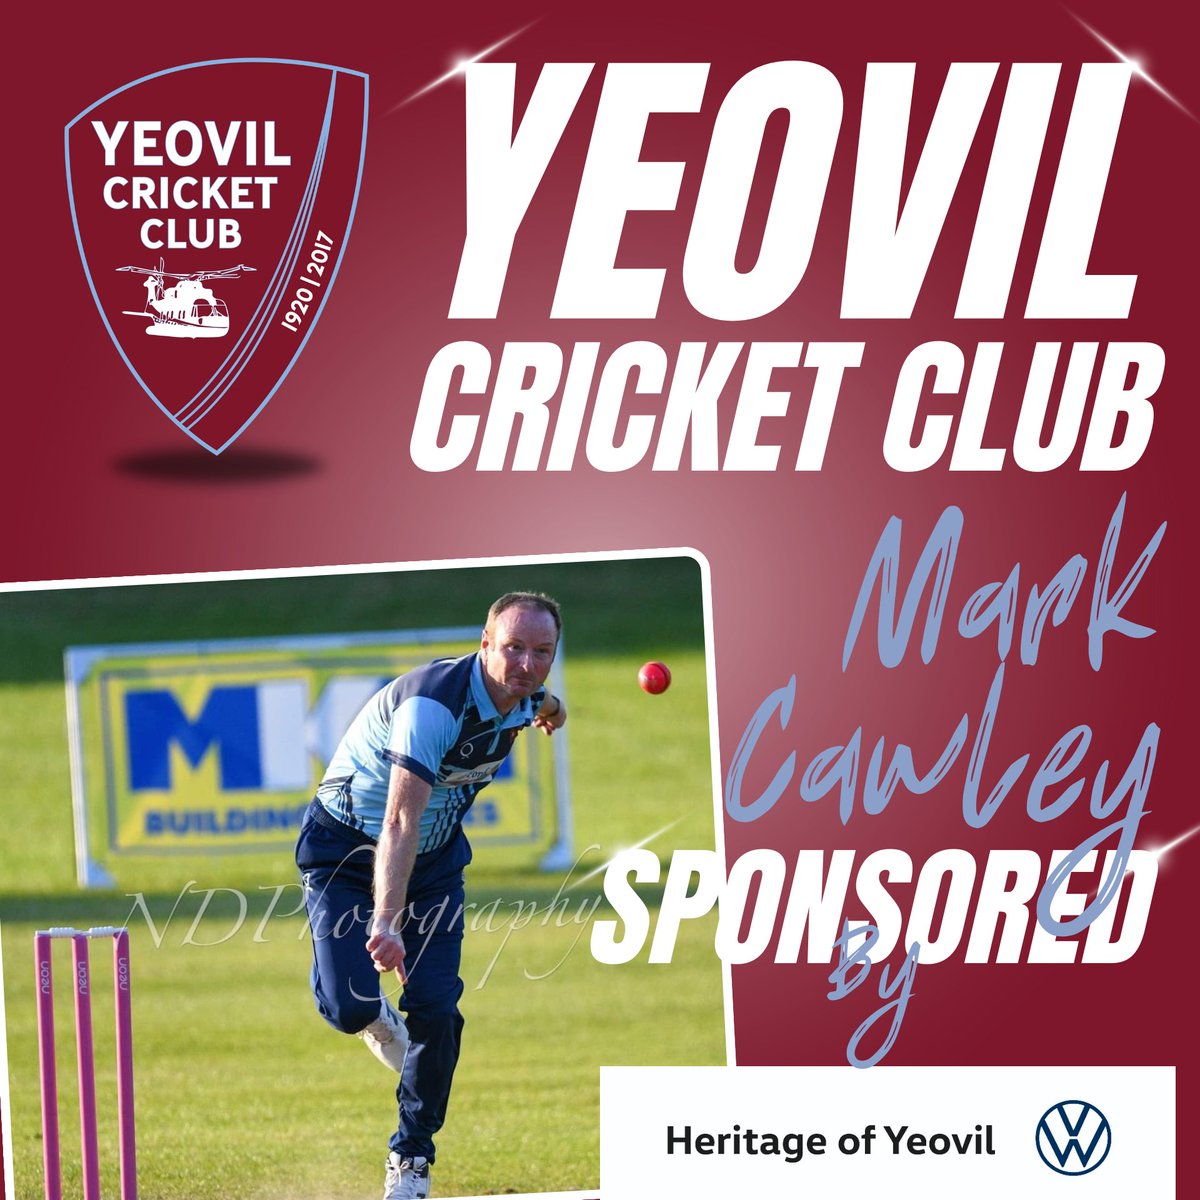 📝 Player Sponsorship 📝 This season @creepycawley9 will be sponsored by @Heritage_Autos. Thank you for your continued support! 🏏 #YCC